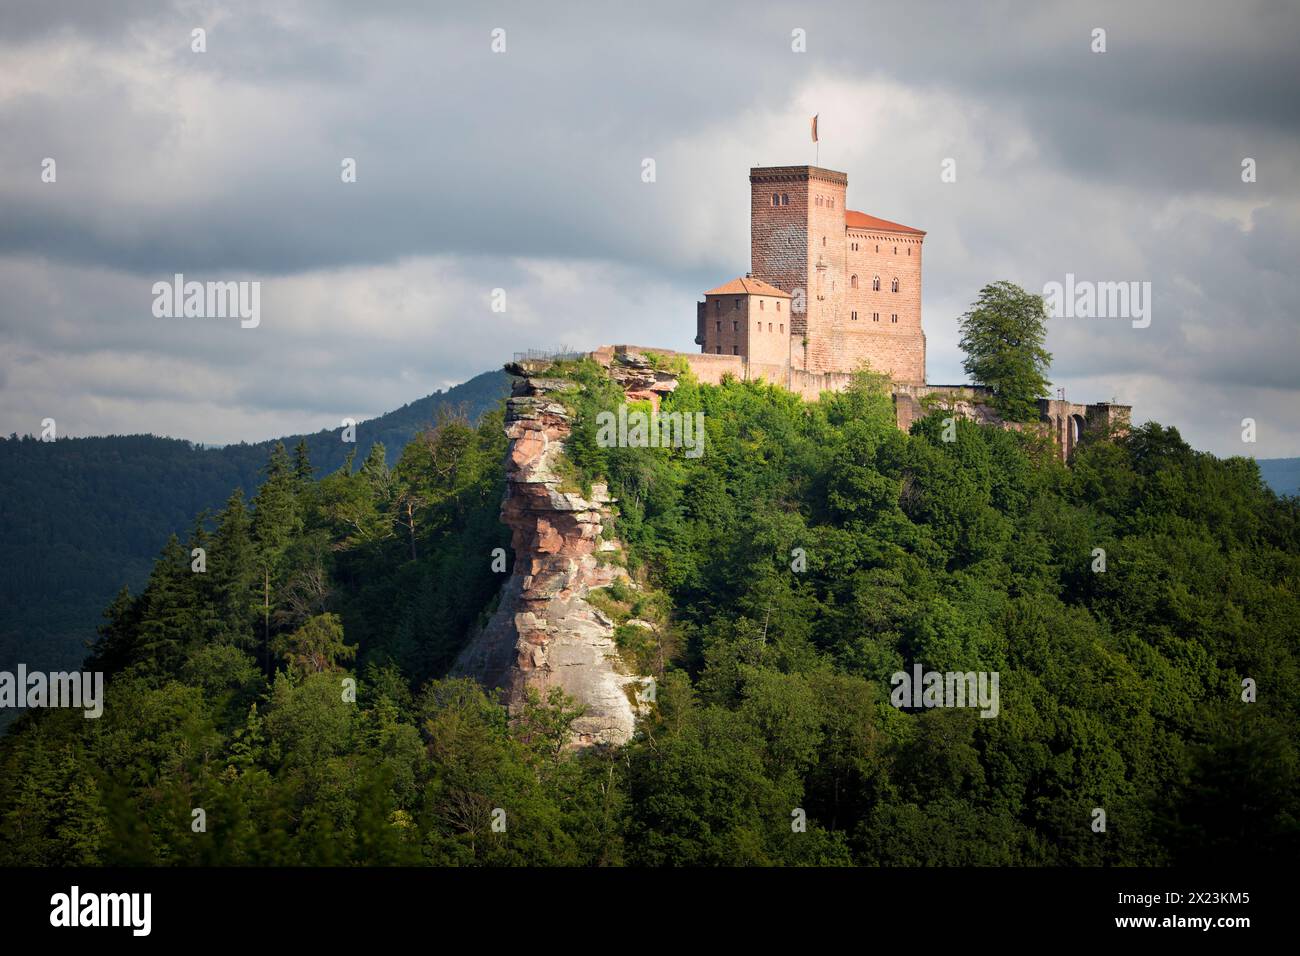 The Reichsburg Trifels in the Palatinate Forest, Annweiler, Rhineland-Palatinate, Germany Stock Photo